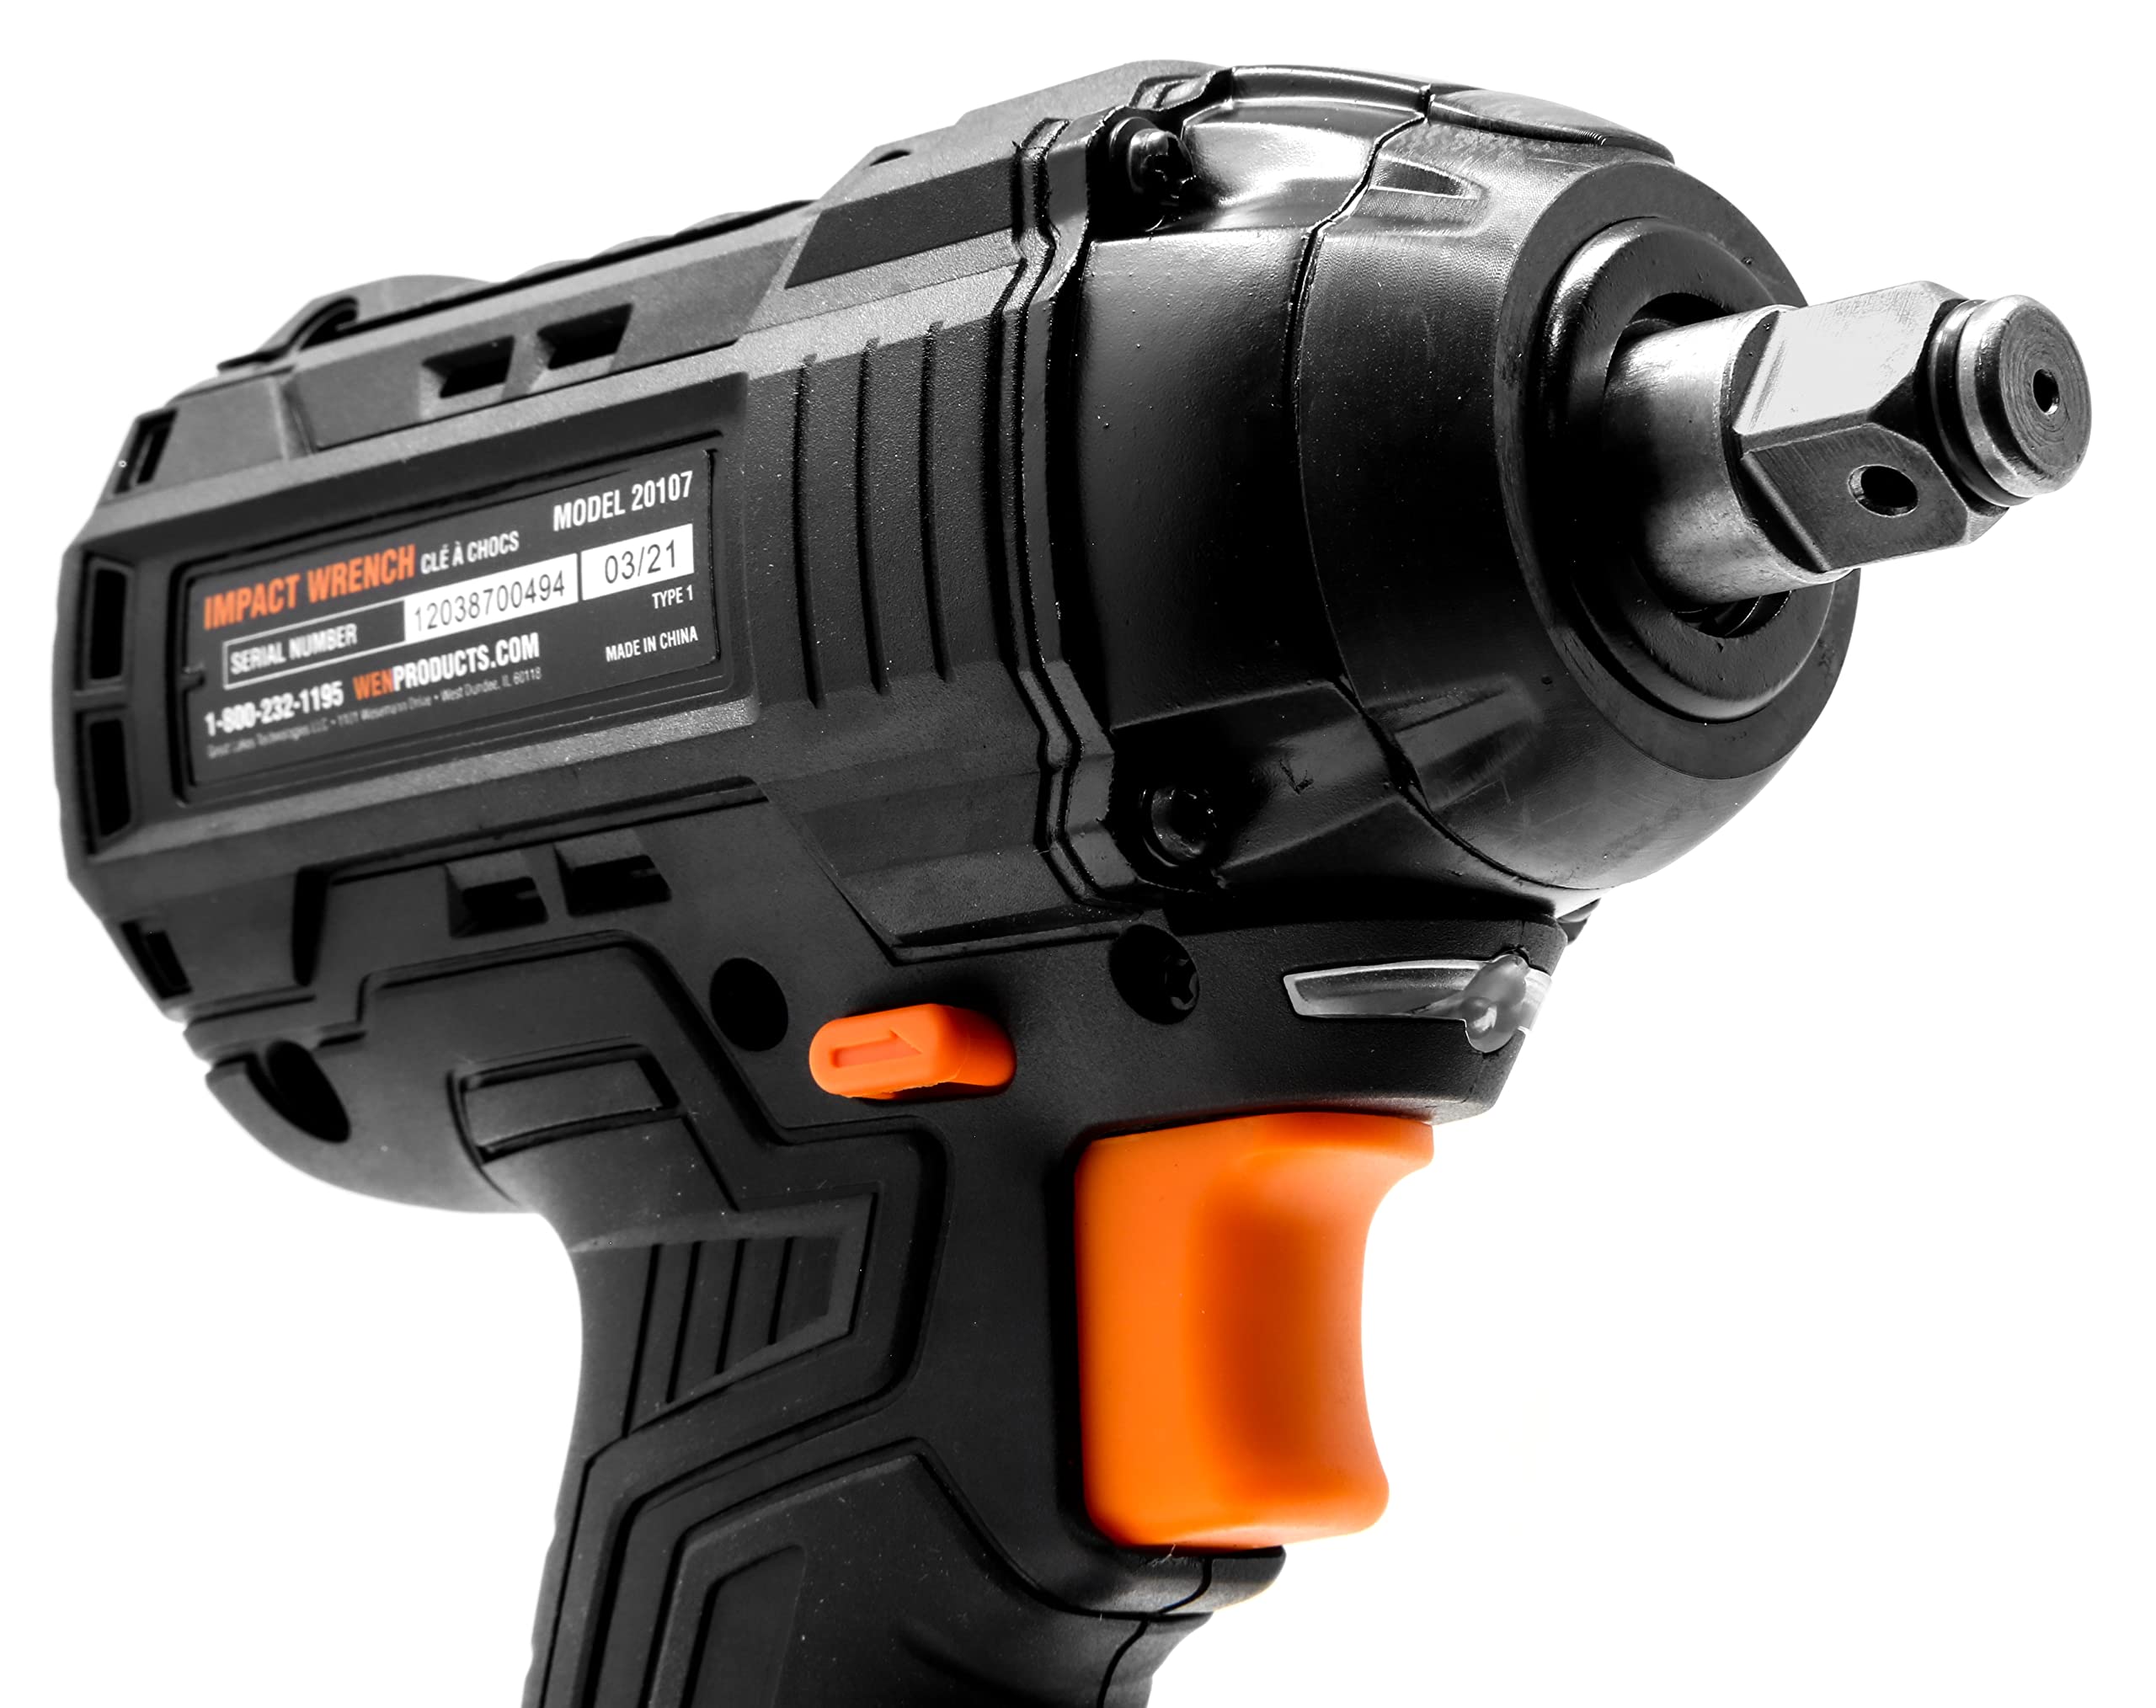 WEN Cordless Impact Wrench, Brushless with 20V Max 2.0 Ah Lithium-Ion Battery and Charger (20107)